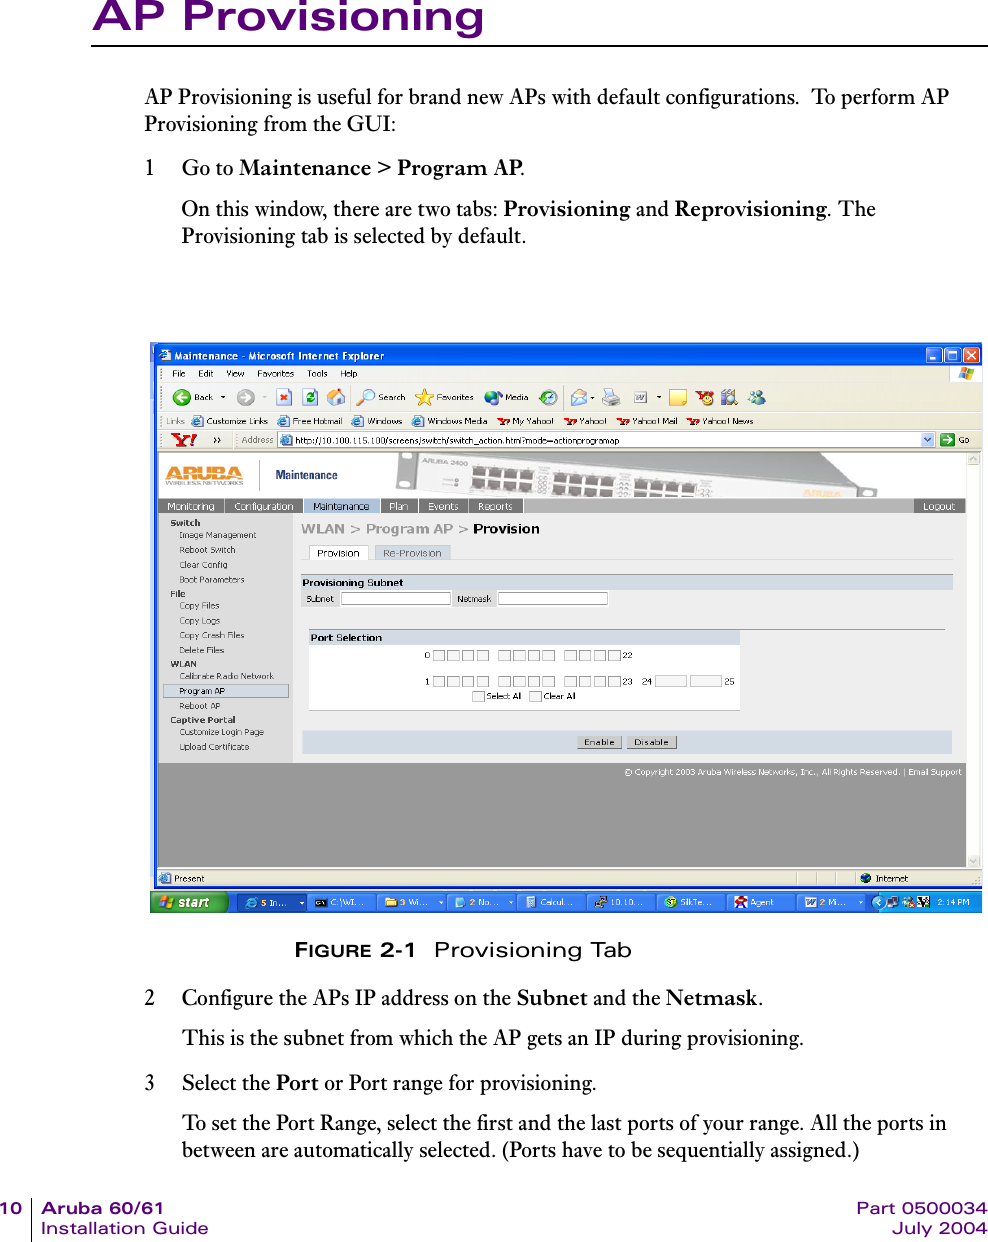 10 Aruba 60/61 Part 0500034Installation Guide July 2004AP ProvisioningAP Provisioning is useful for brand new APs with default configurations.  To perform AP Provisioning from the GUI:1Go to Maintenance &gt; Program AP.On this window, there are two tabs: Provisioning and Reprovisioning. The Provisioning tab is selected by default.FIGURE 2-1  Provisioning Tab2 Configure the APs IP address on the Subnet and the Netmask. This is the subnet from which the AP gets an IP during provisioning.3 Select the Port or Port range for provisioning.To set the Port Range, select the first and the last ports of your range. All the ports in between are automatically selected. (Ports have to be sequentially assigned.) 